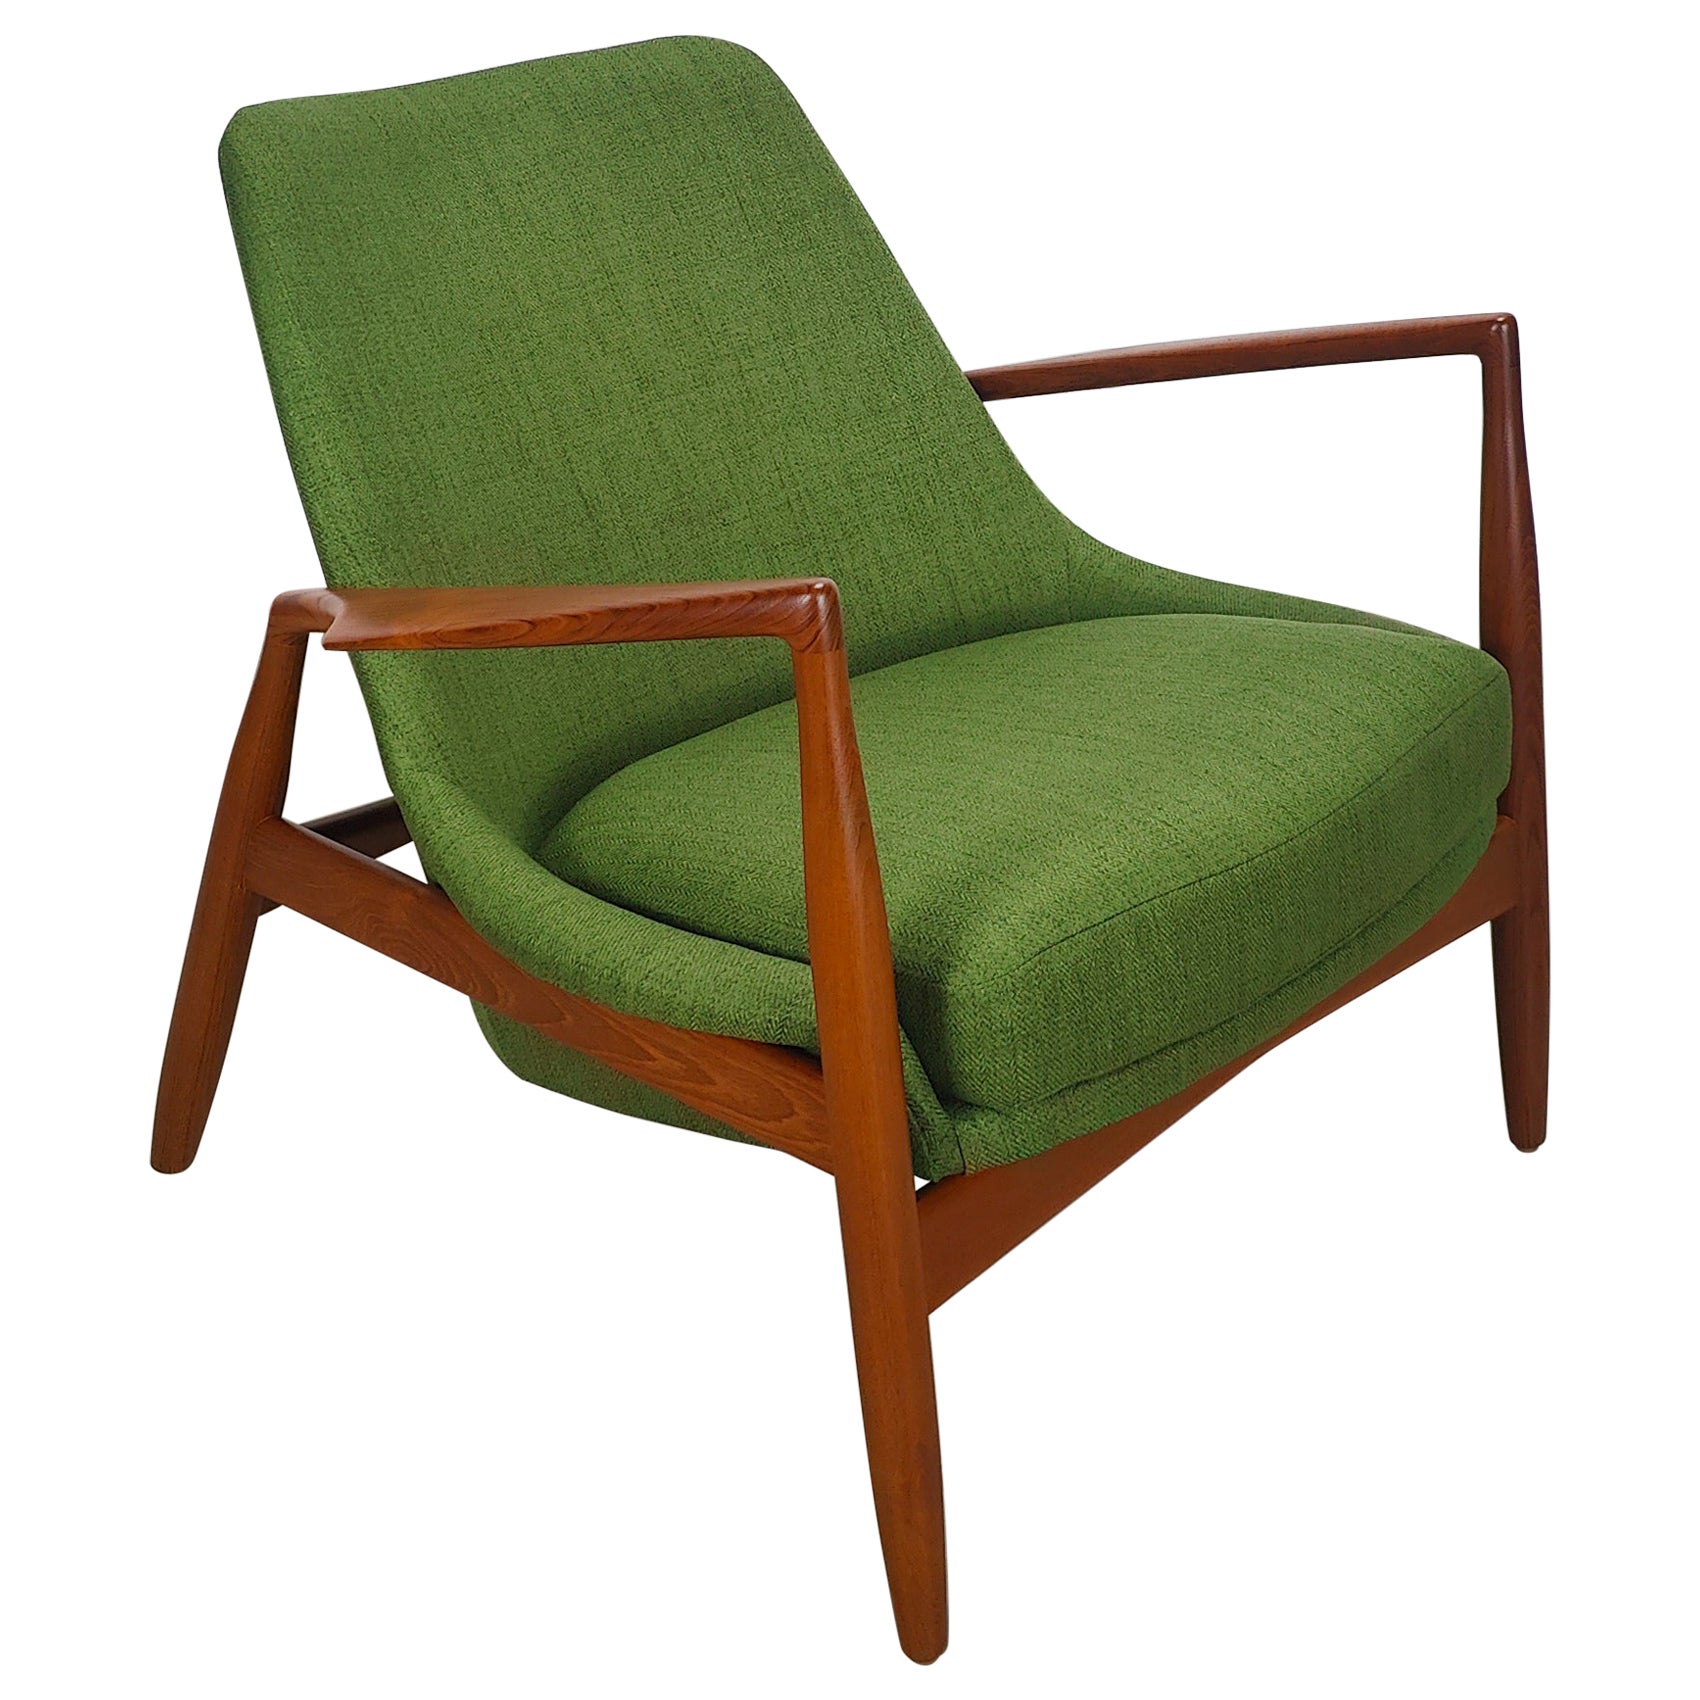 "Seal" Lounge Chair by IB Kofod Larsen for OPE, Sweden, 1950s, Teak Frame